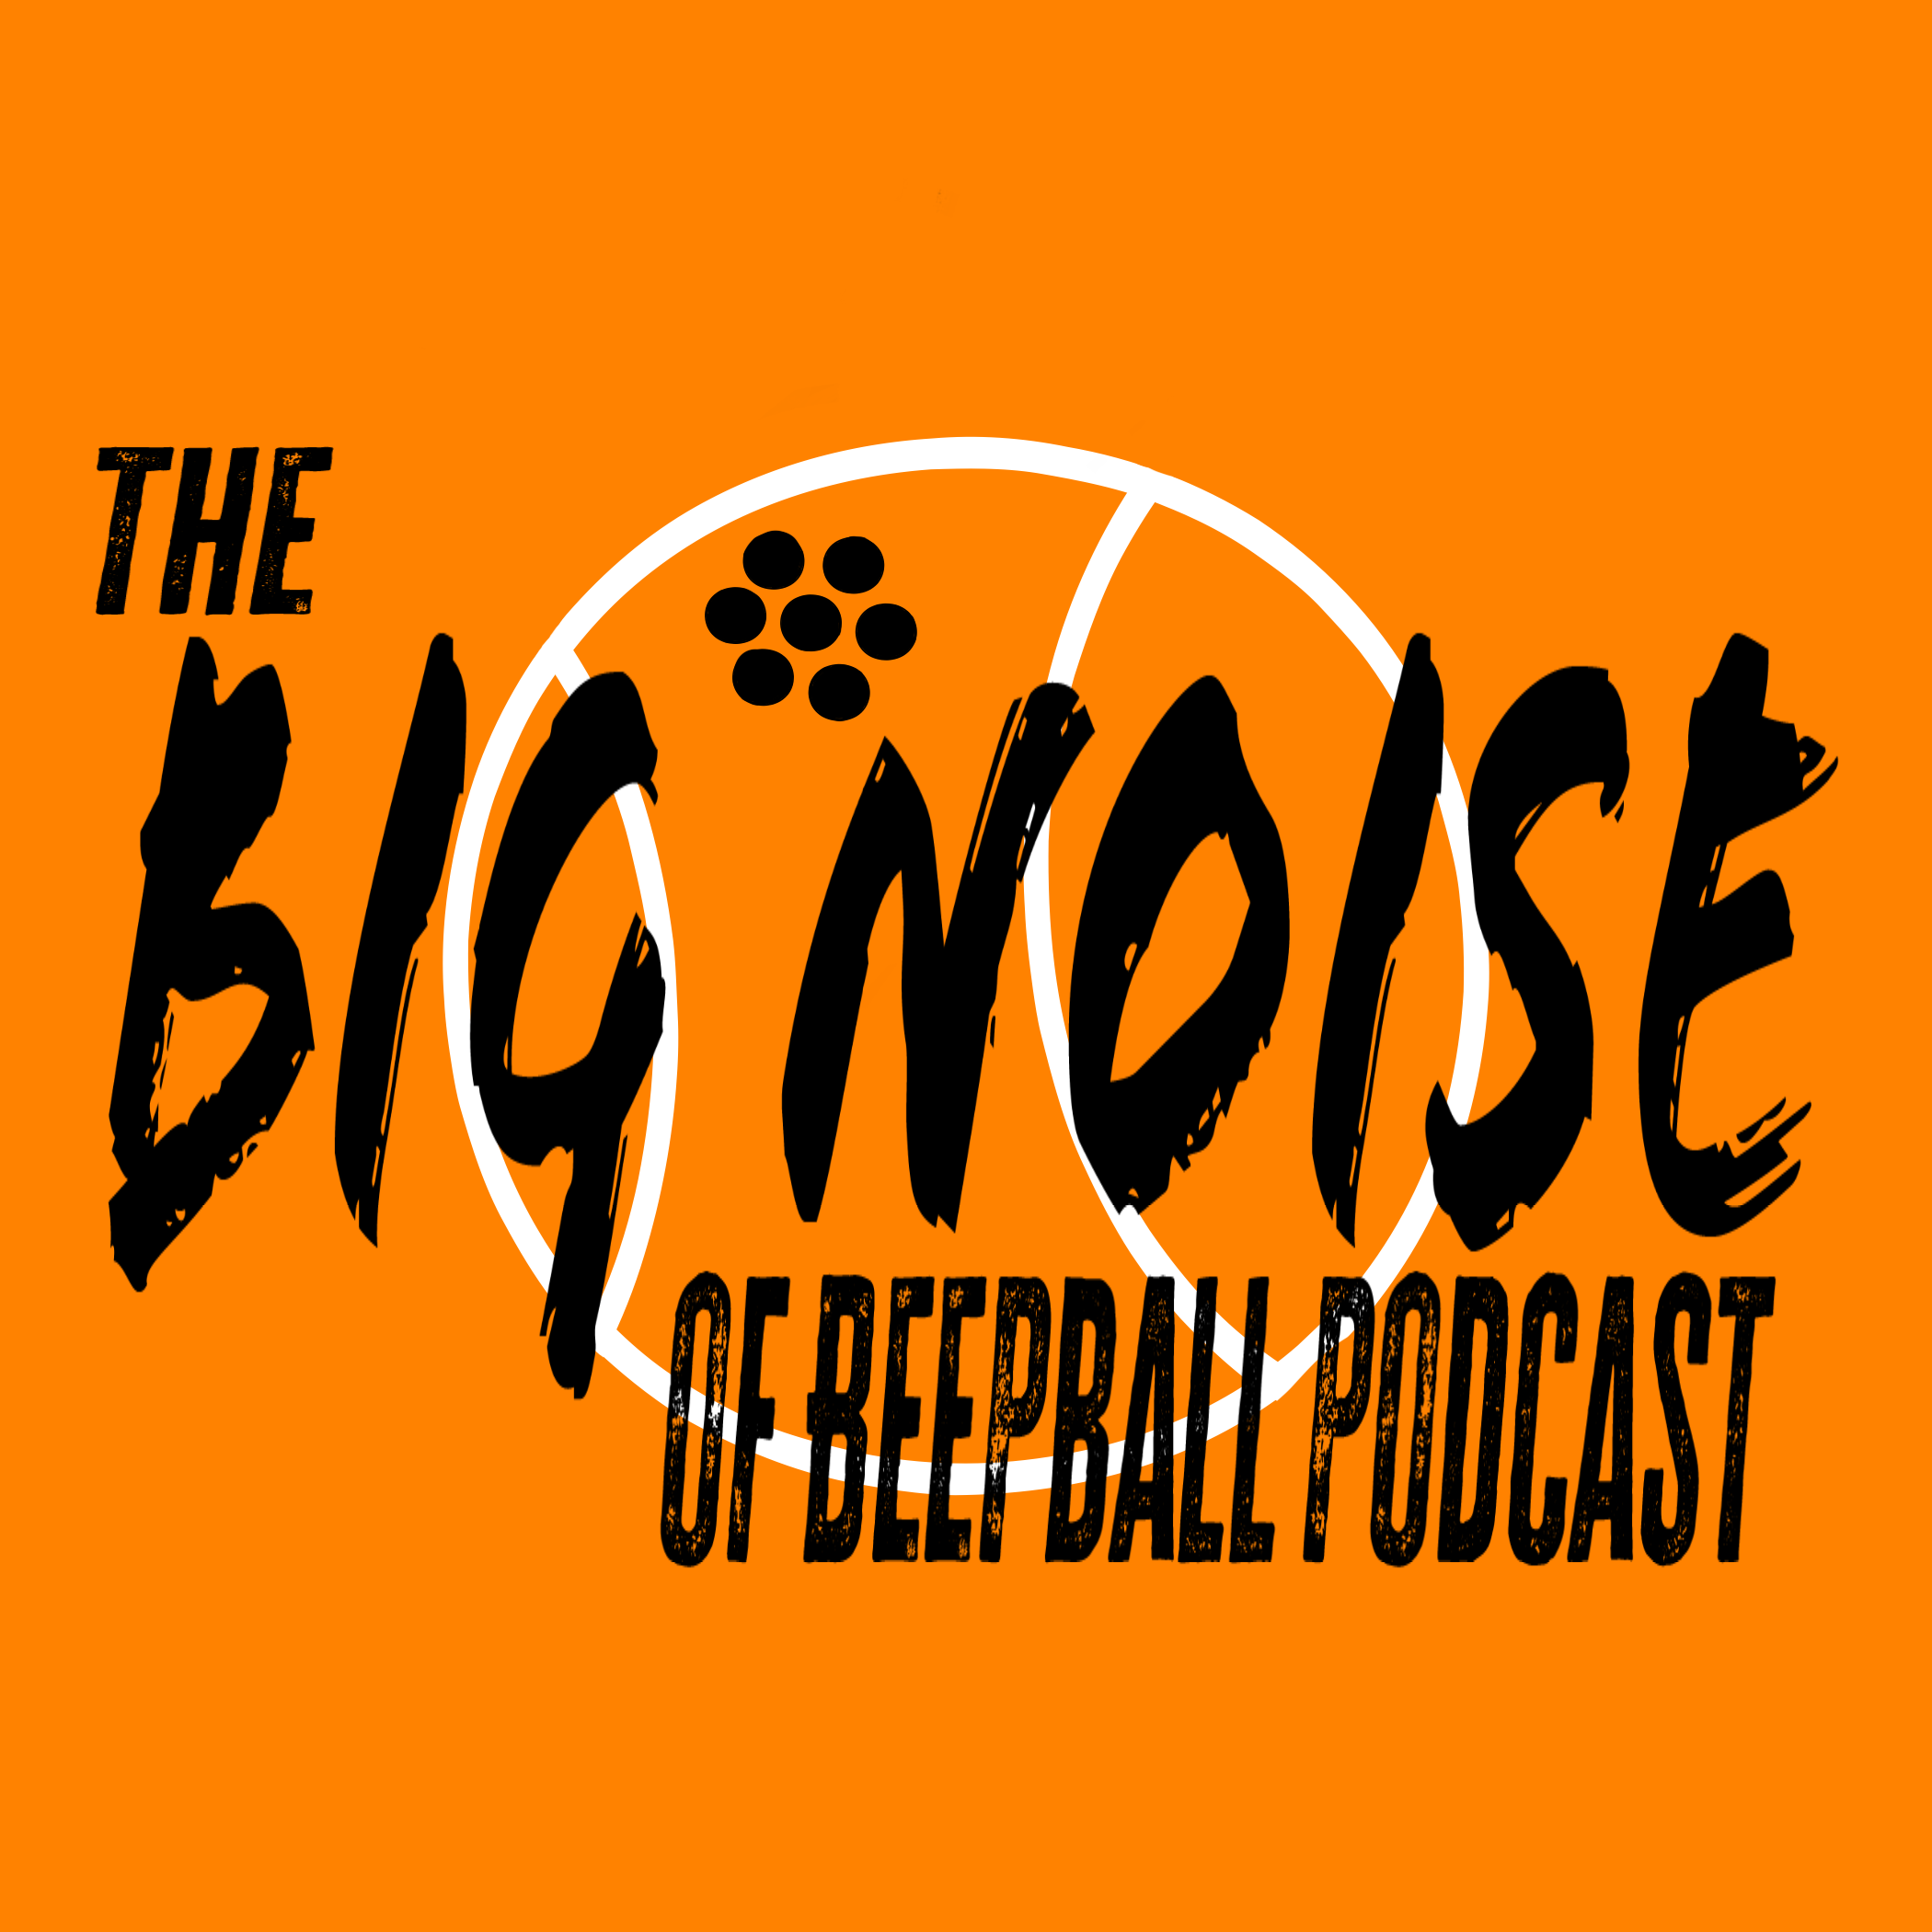 The Big Noise of BeepBall Podcast on Orange Background with a beepball outline